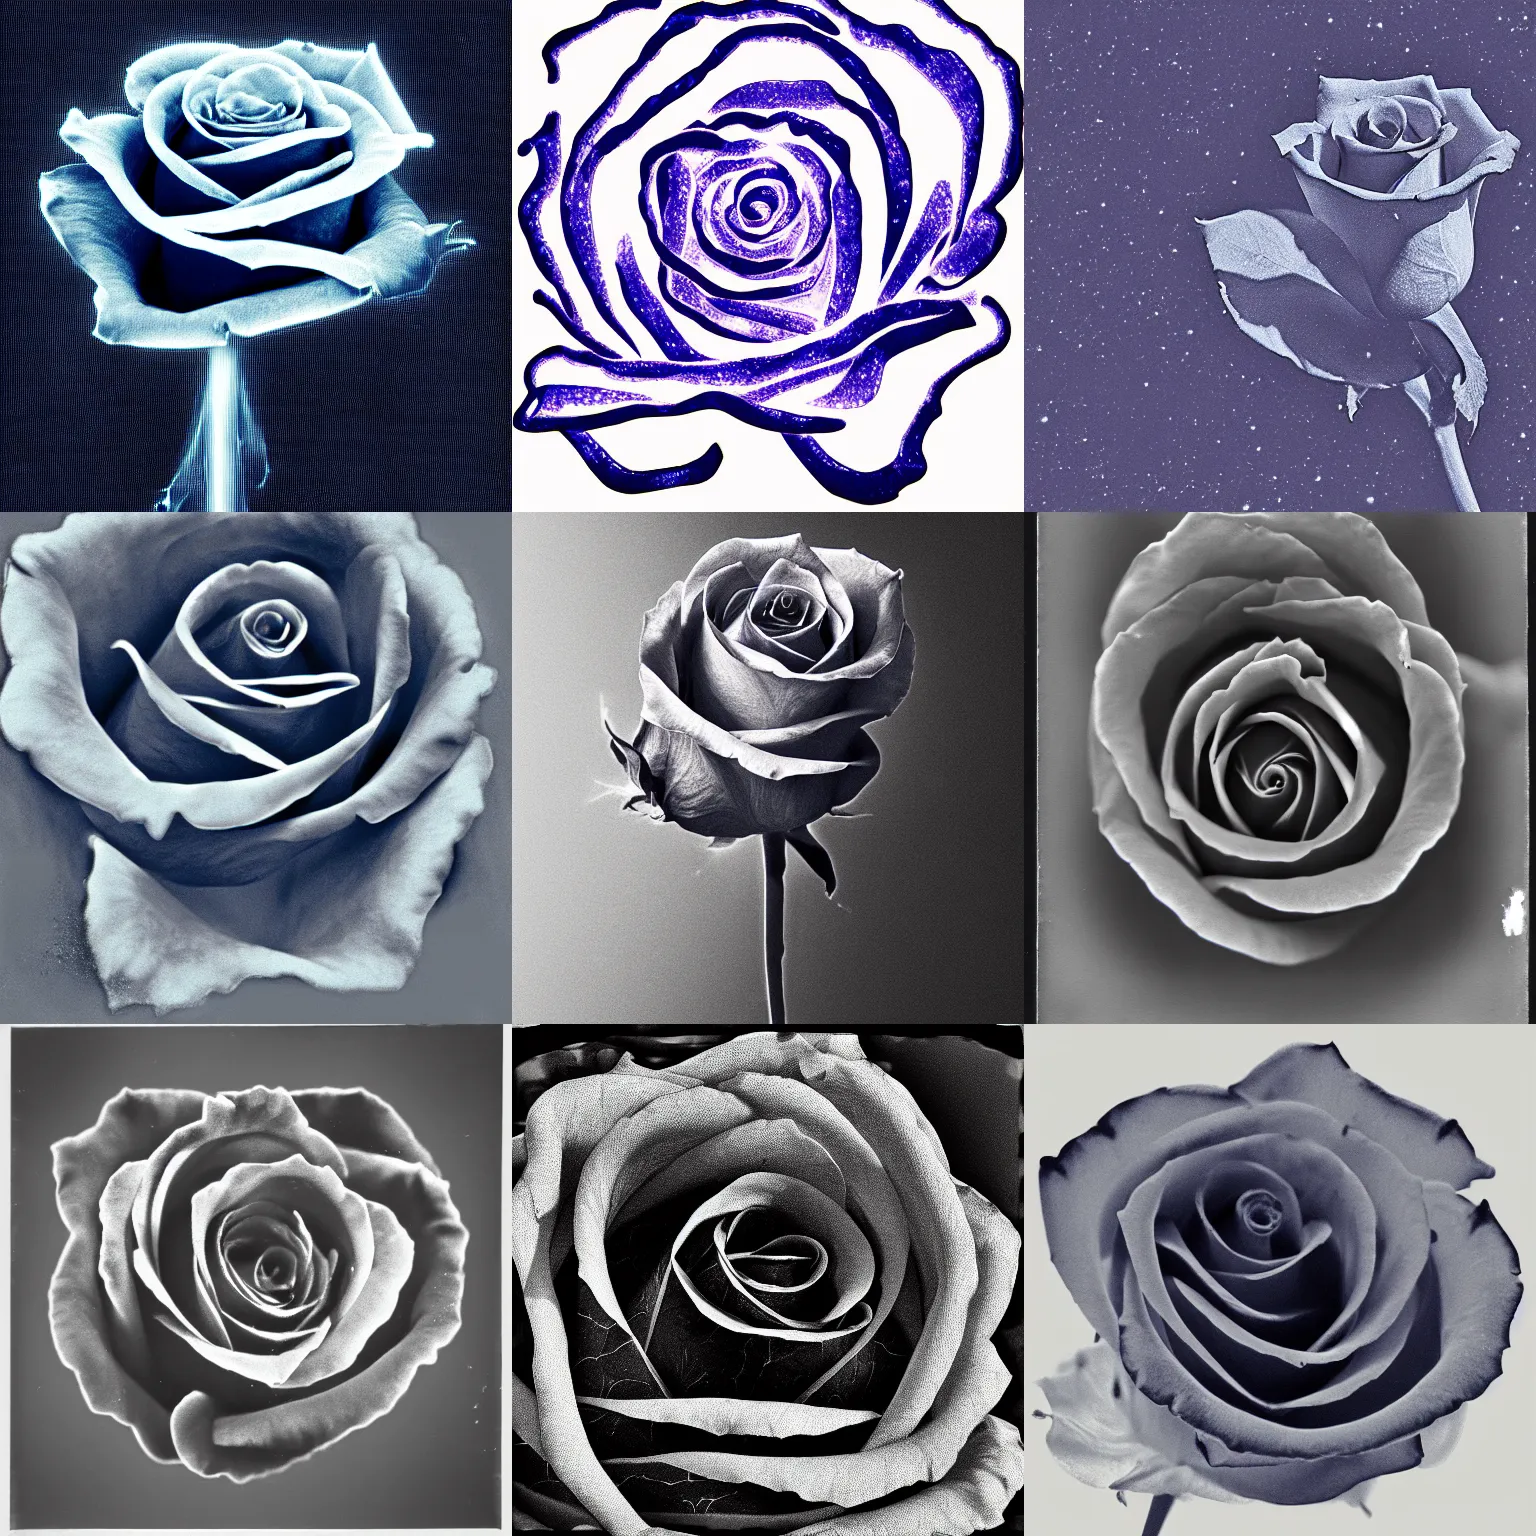 Prompt: single long stem rose in center of image, super zoomed out, white x-ray silhouette out on dark sapphire blue background, grainy vintage